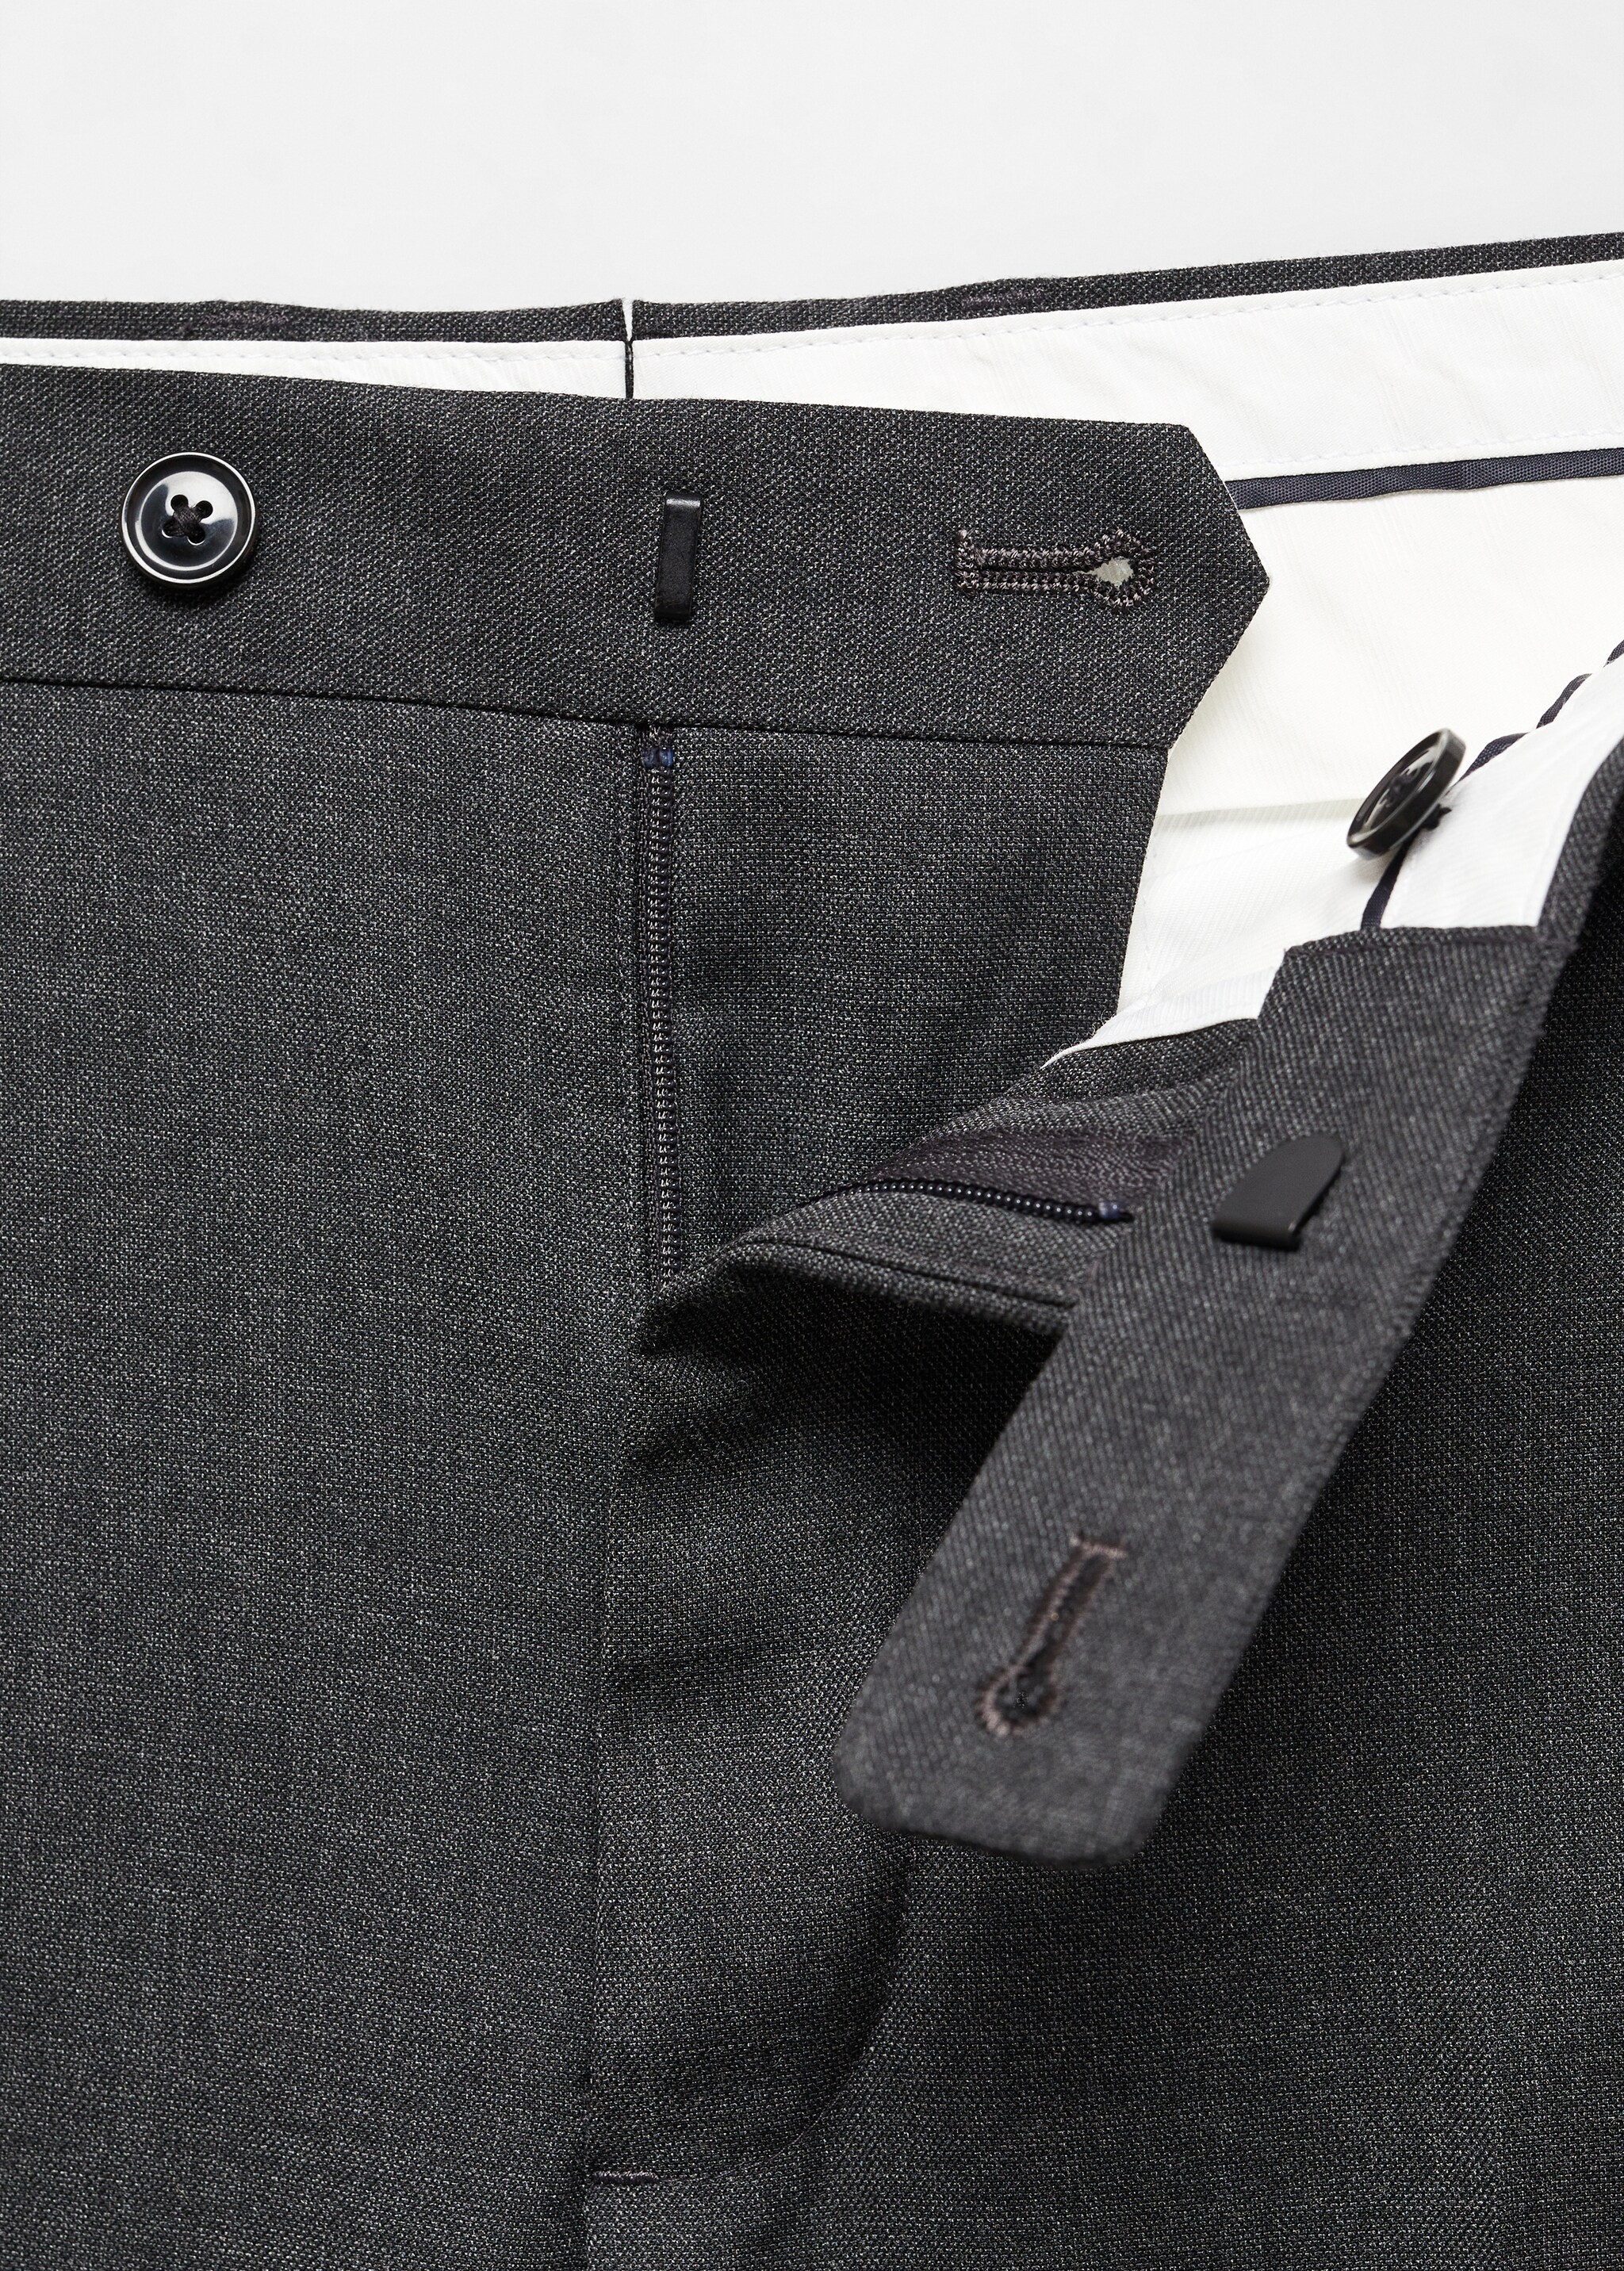  Suit trousers - Details of the article 8